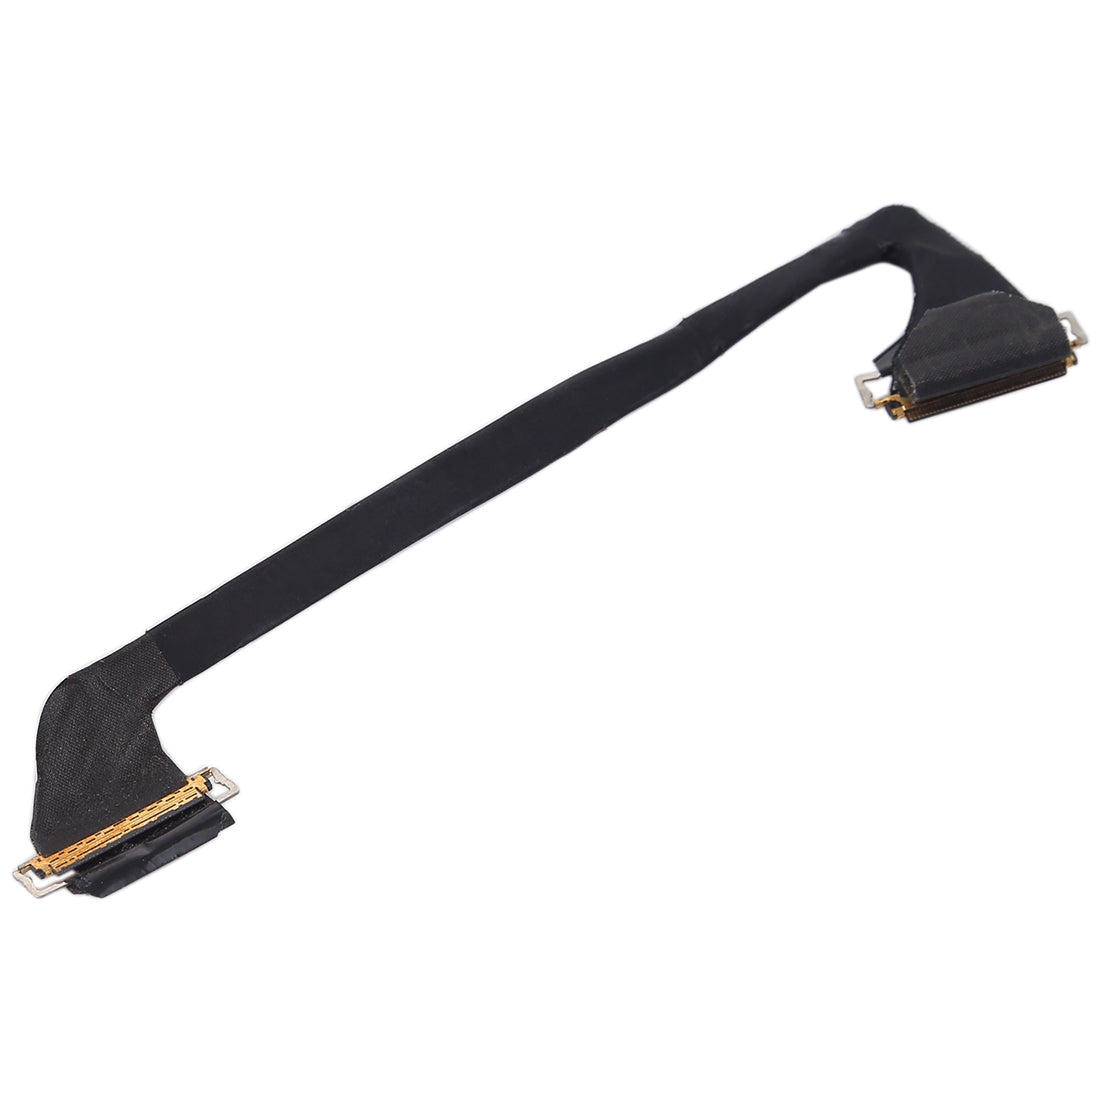 LCD Connector Flex Cable Apple MacBook Pro 15 A1286 2010 2011